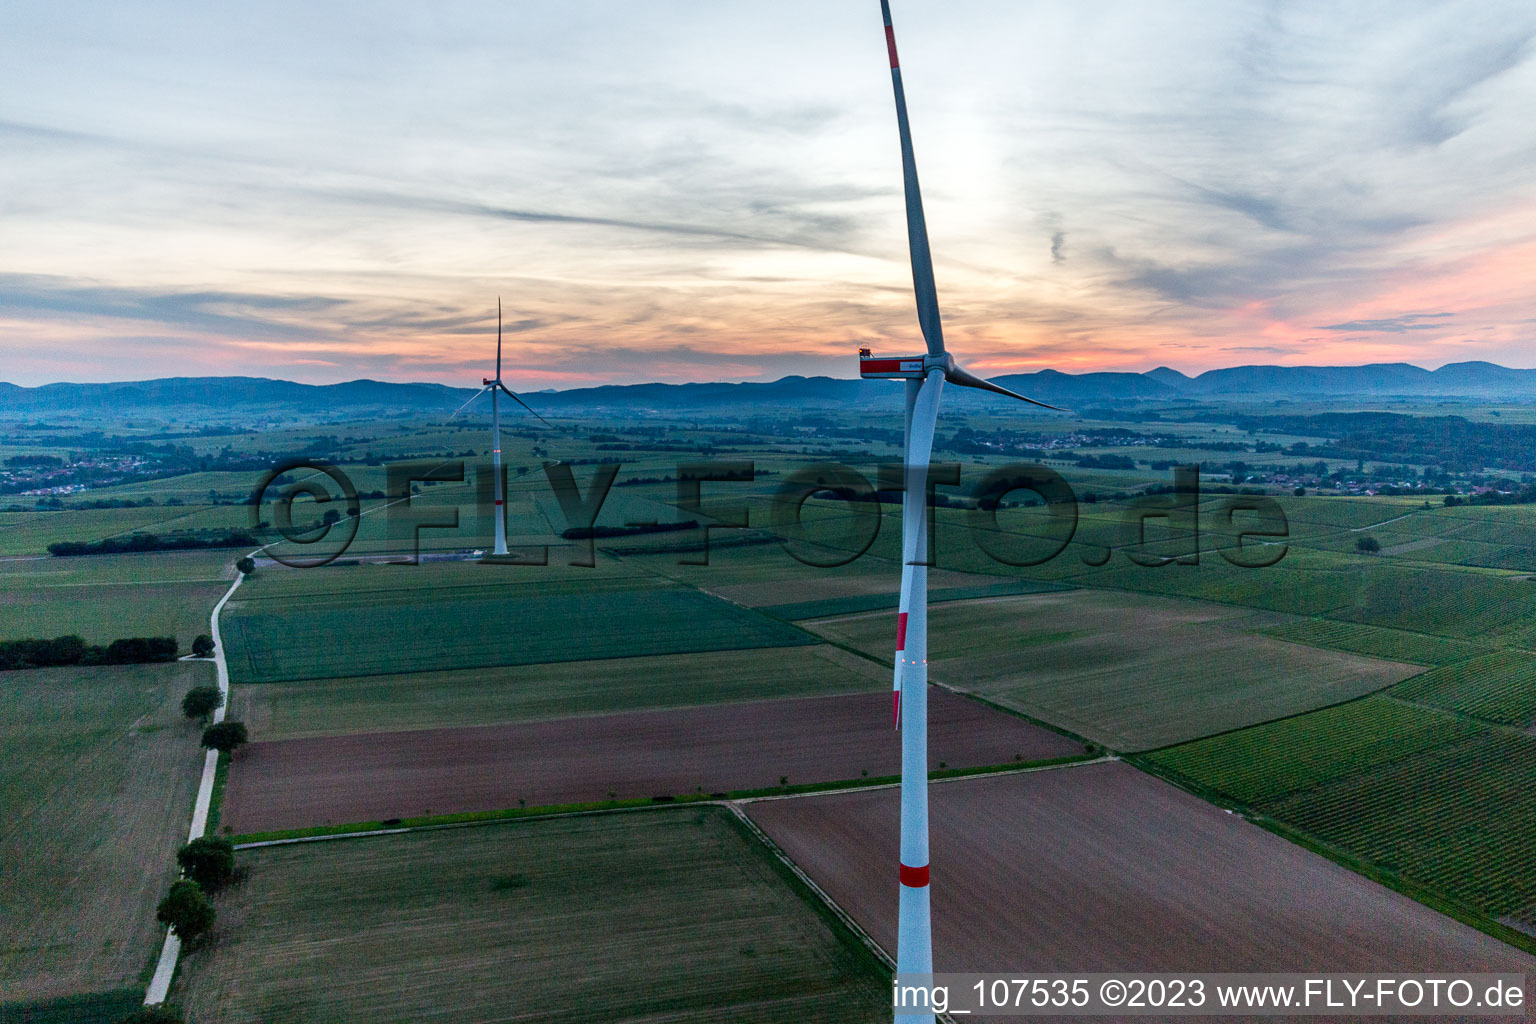 EnBW wind farm - wind turbine with 6 wind turbines in Freckenfeld in the state Rhineland-Palatinate, Germany